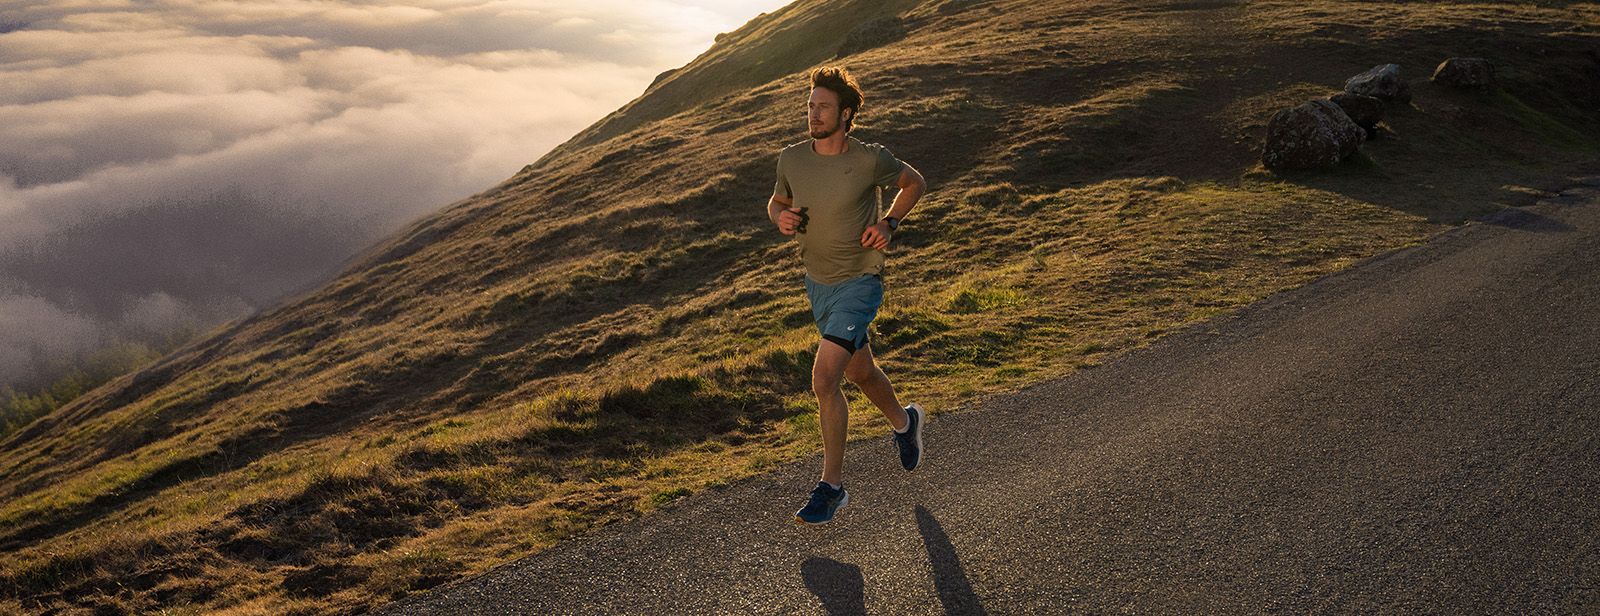 Man running on mountain top with ASICS clothing.